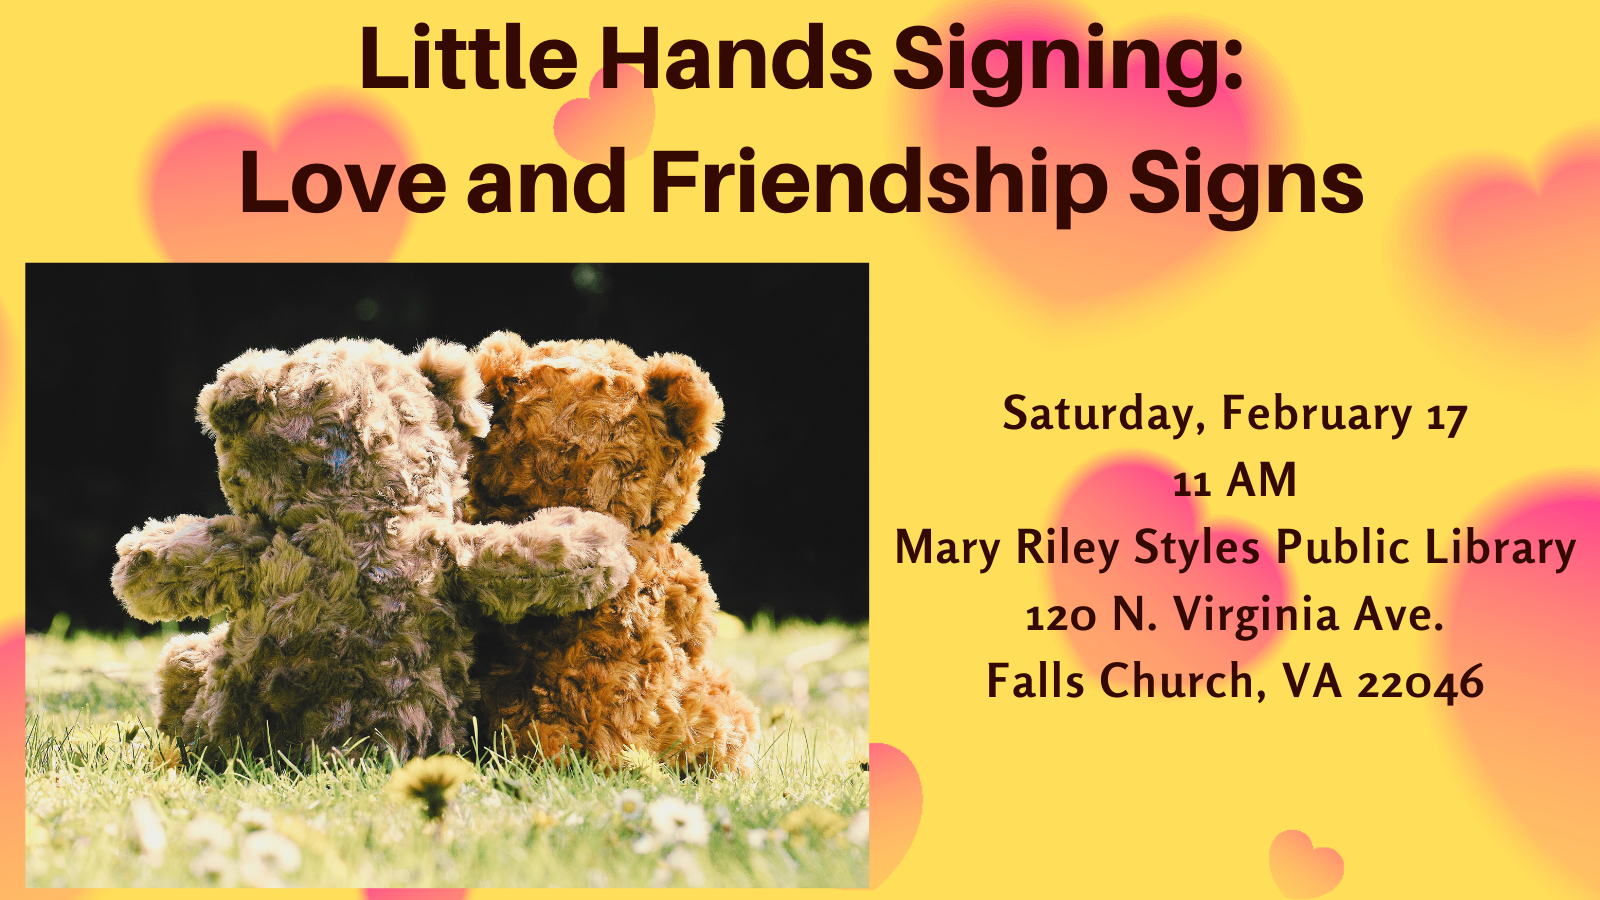 A photo of 2 teddy bears with their arms around each other appears next to the text: Little Hands Signing: Love and Friendship Signs. Saturday, February 17. 11 AM. Mary Riley Styles Public Library, 120 N. Virginia Ave., Falls Church, VA 22046